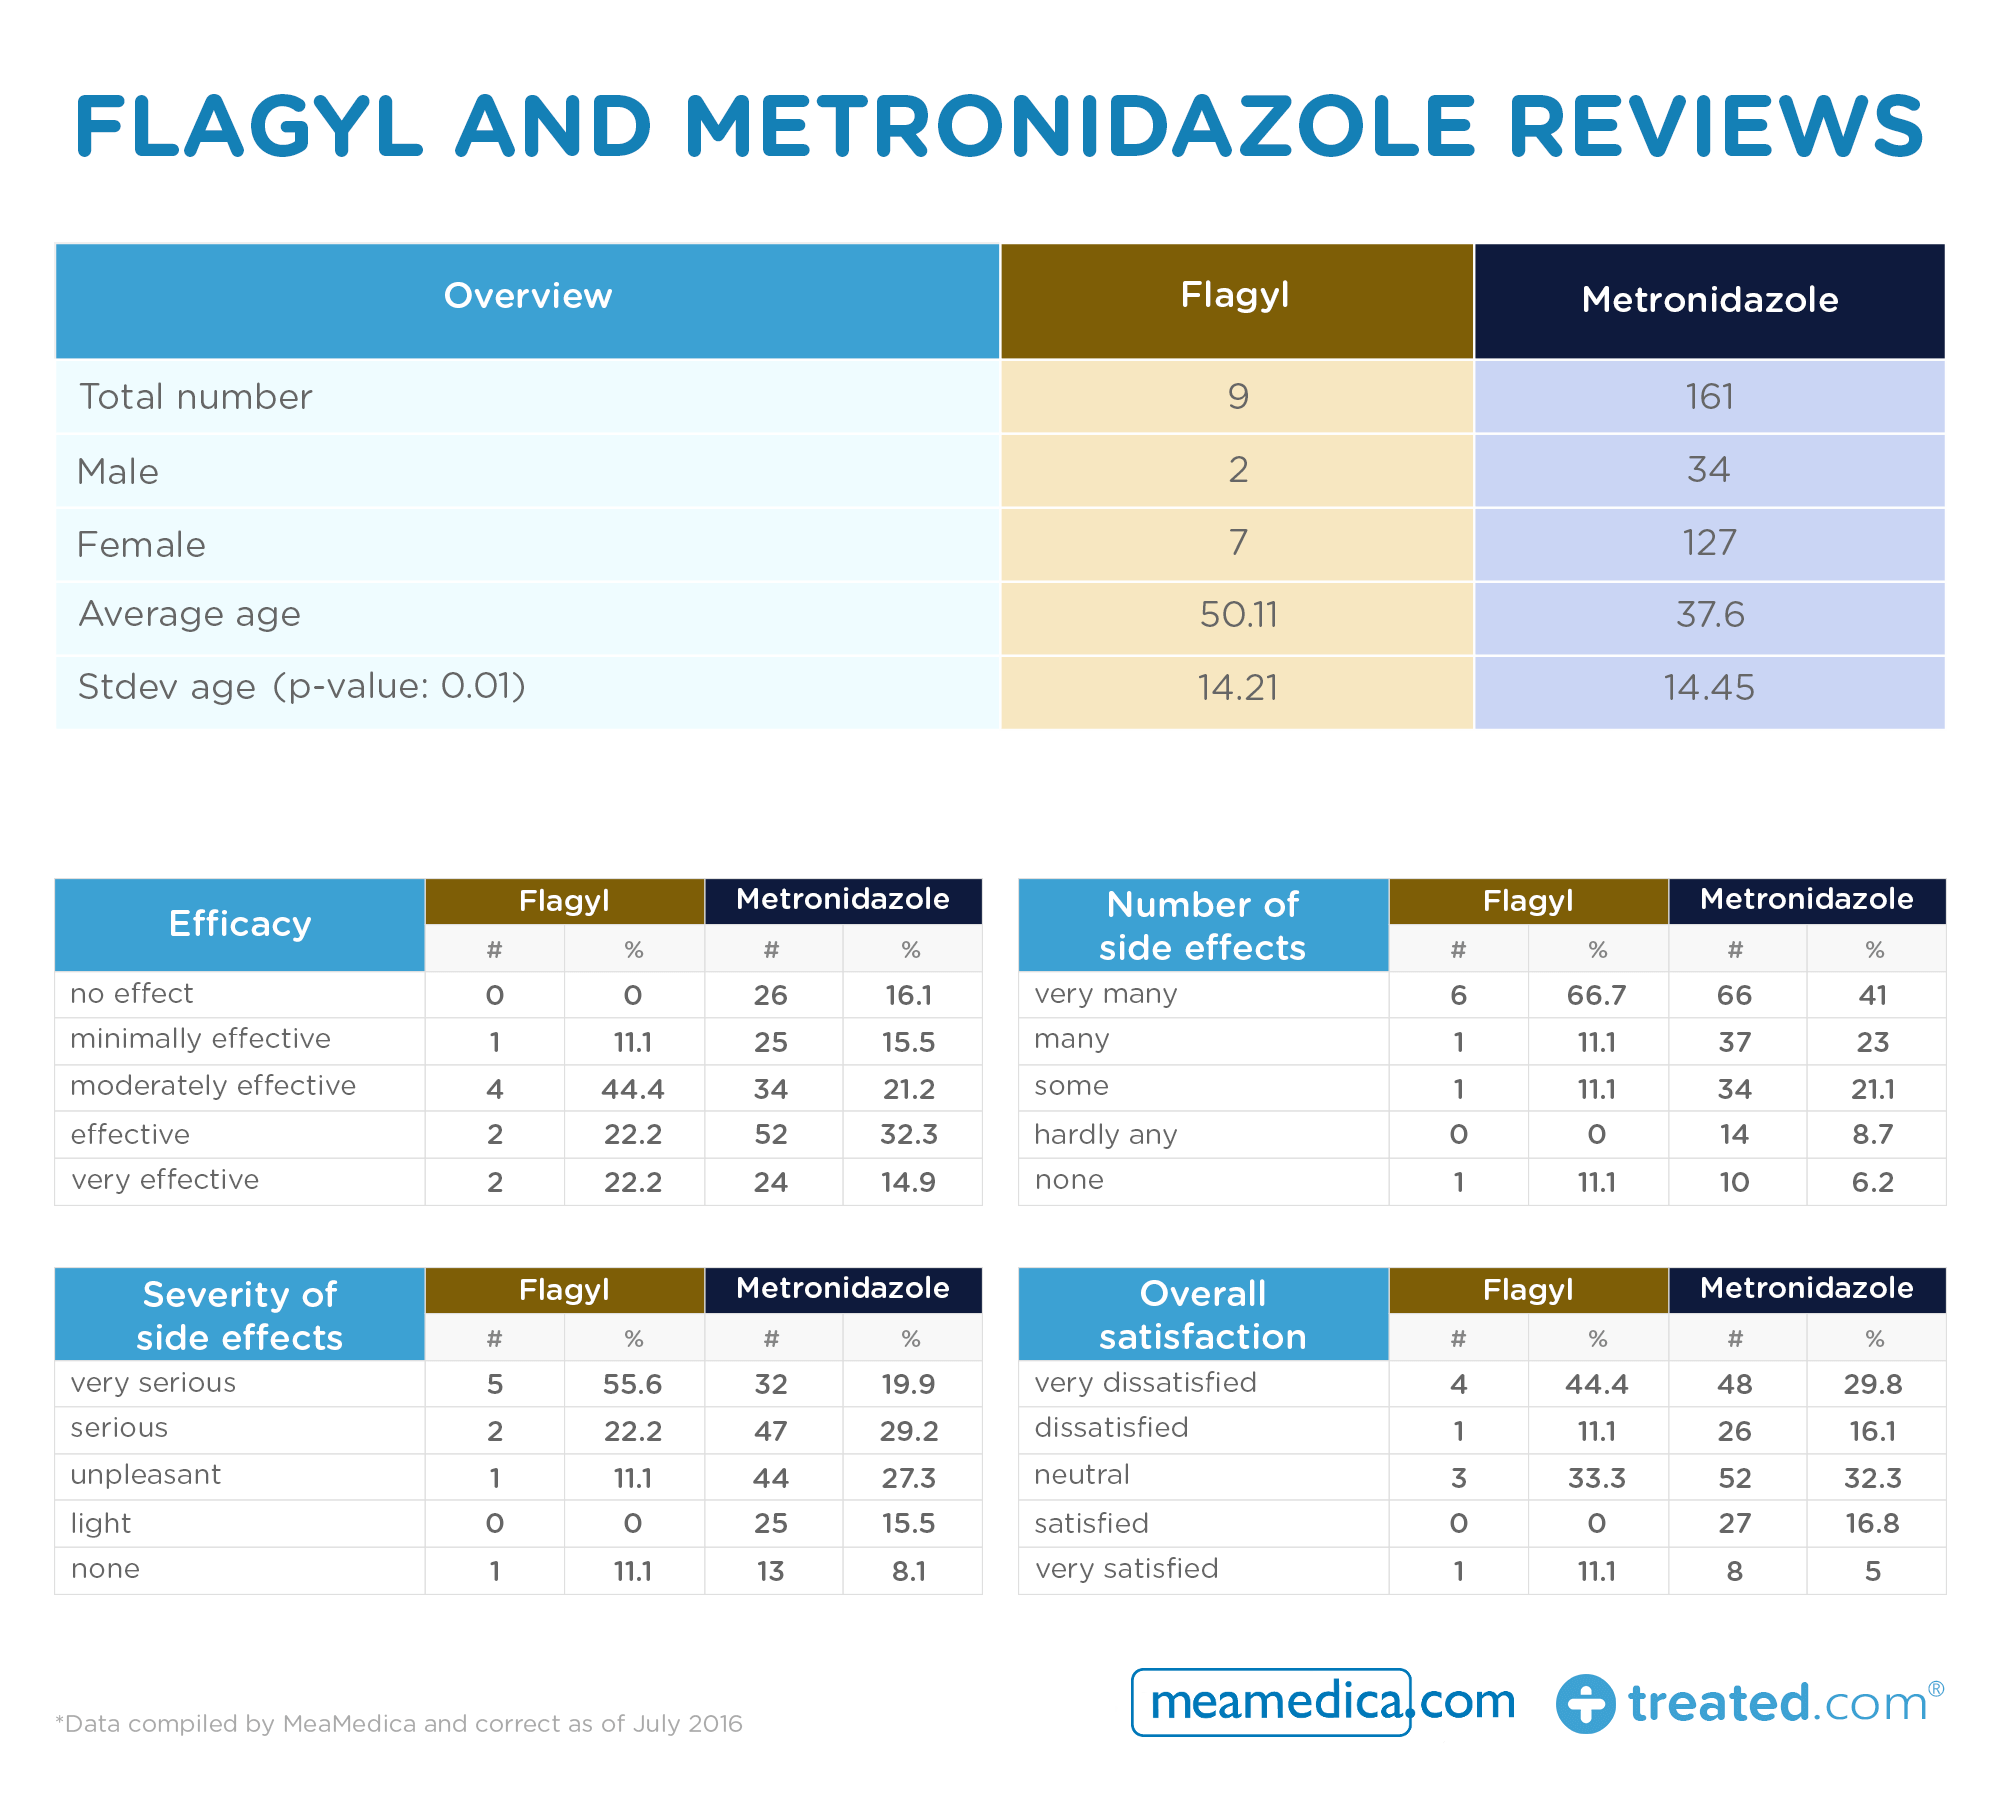 Flagyl and Metronidazole reviews table